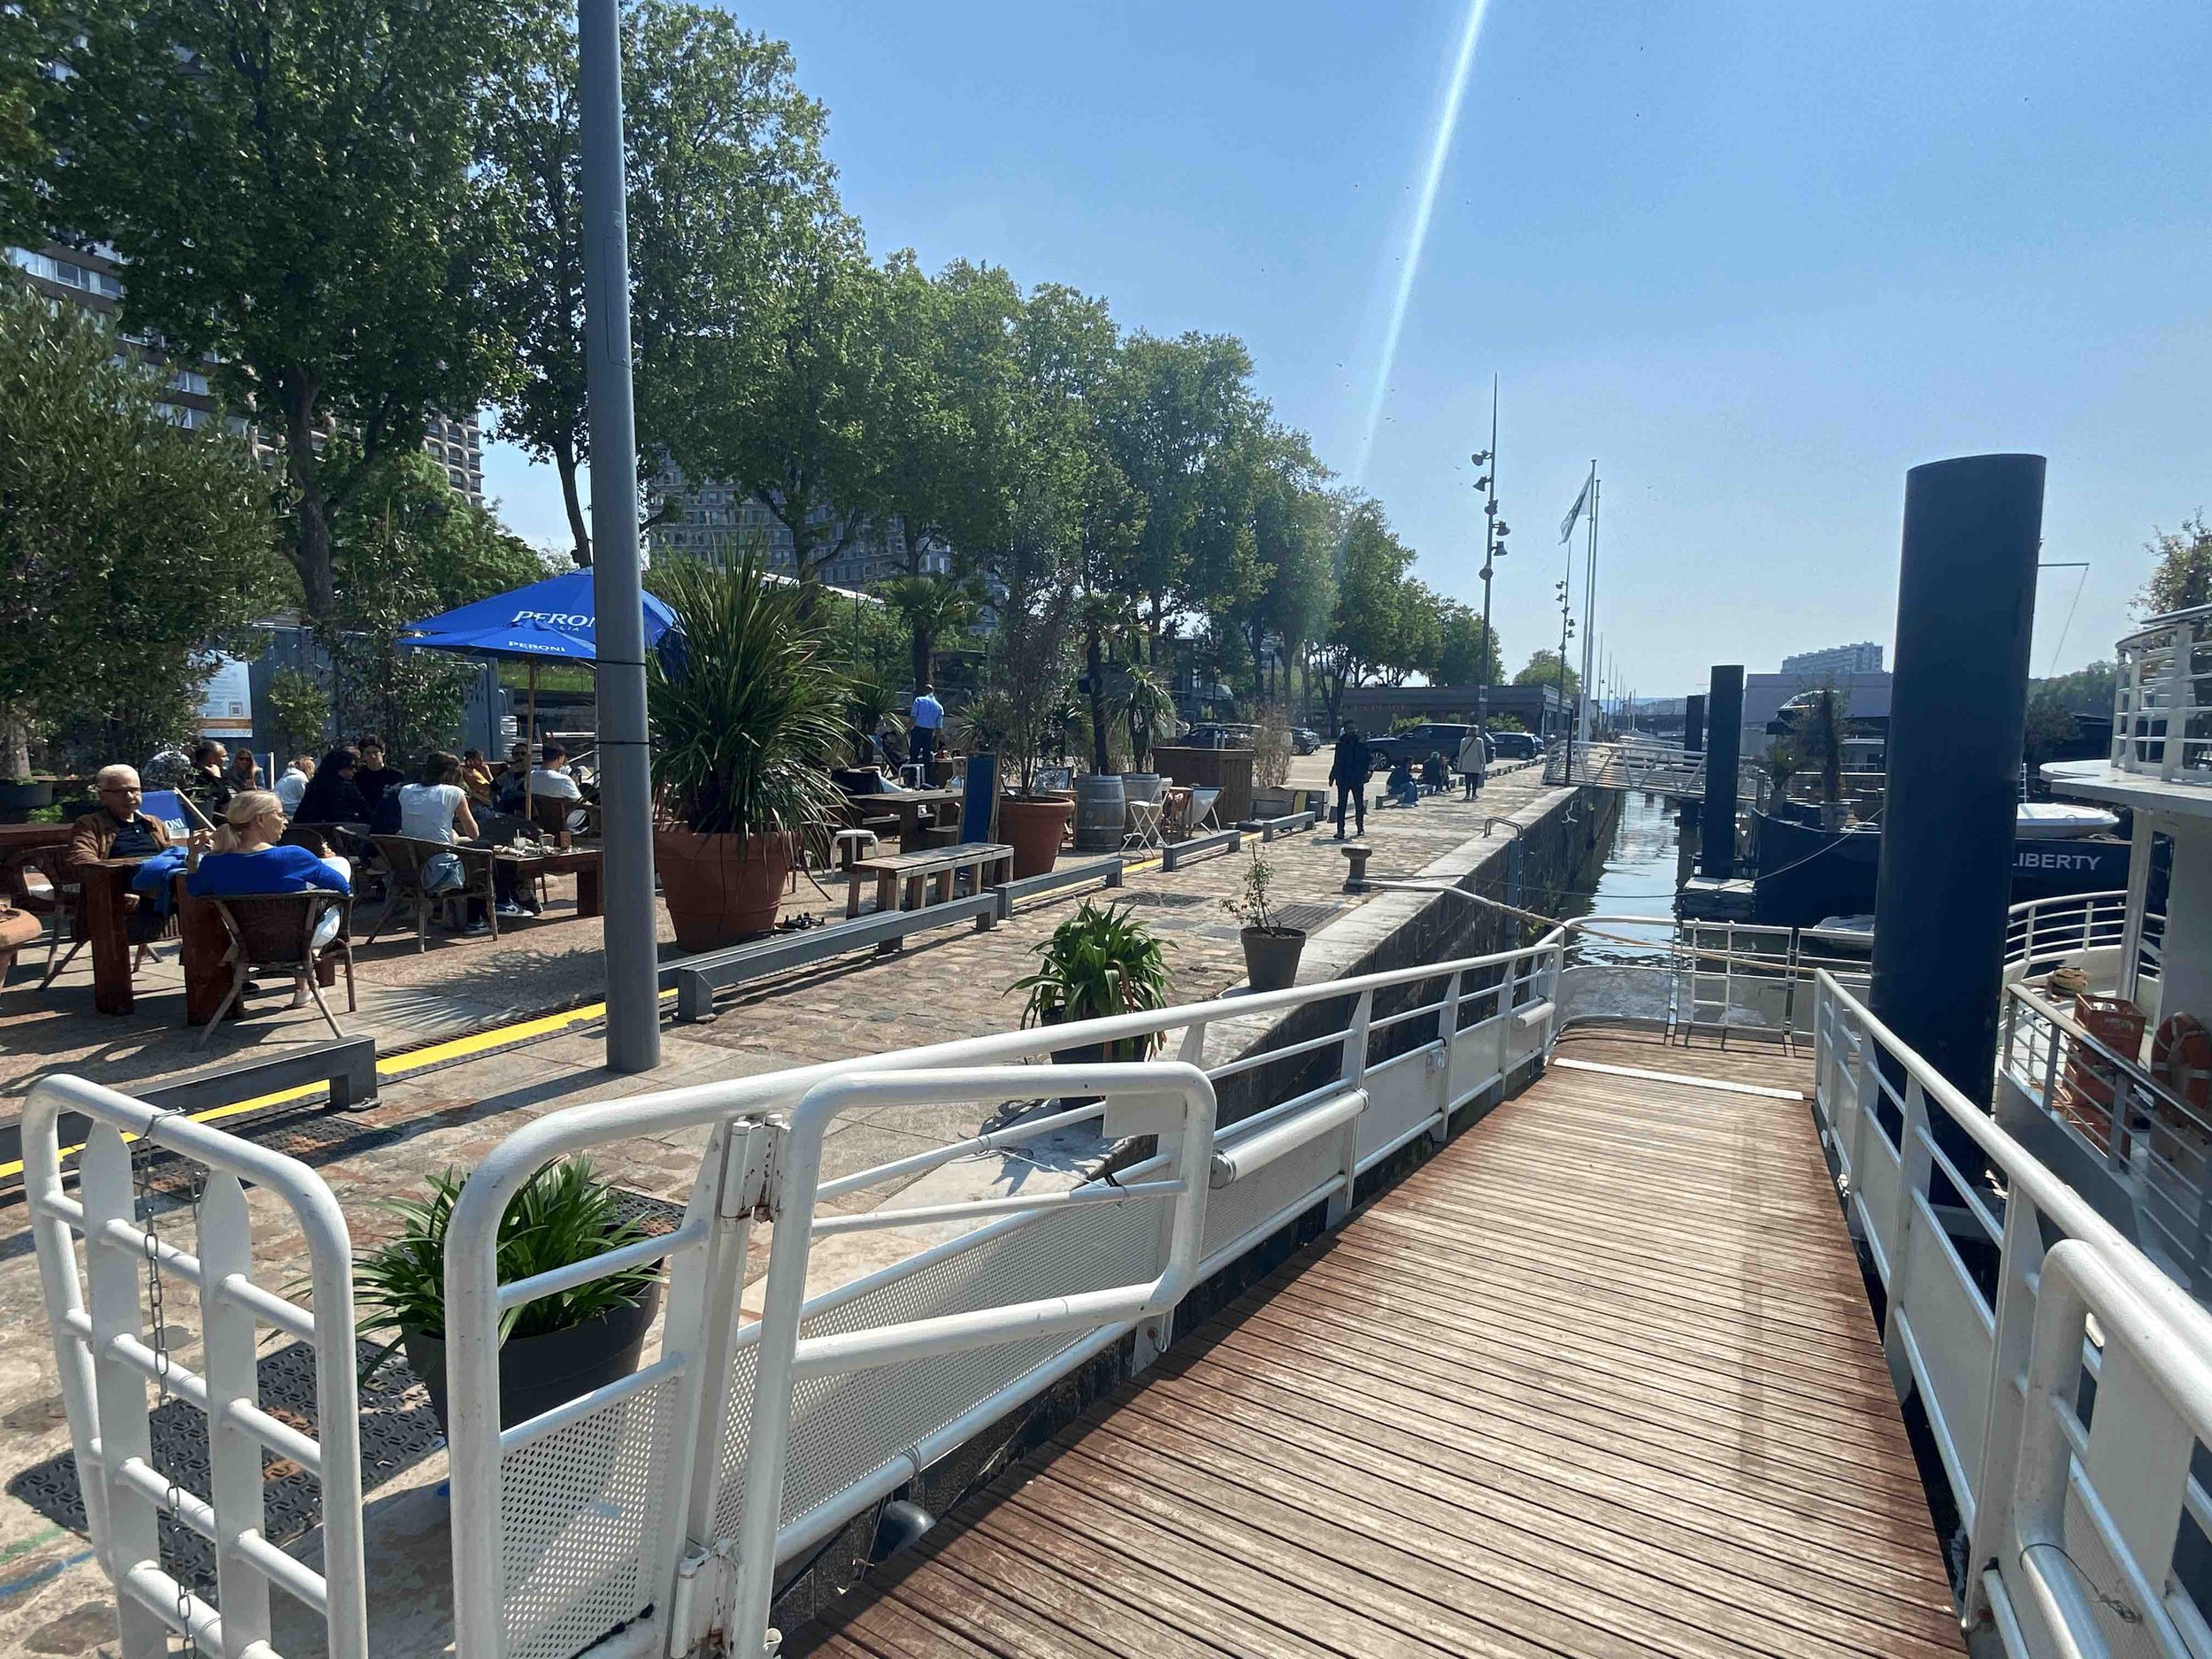  The walkway essentially act as bustling boulevards, bridging the gap between on-ground restaurants, recreational facilities, and the unique offerings aboard the boats which also act as restaurants. This blend of land and water-based amenities create